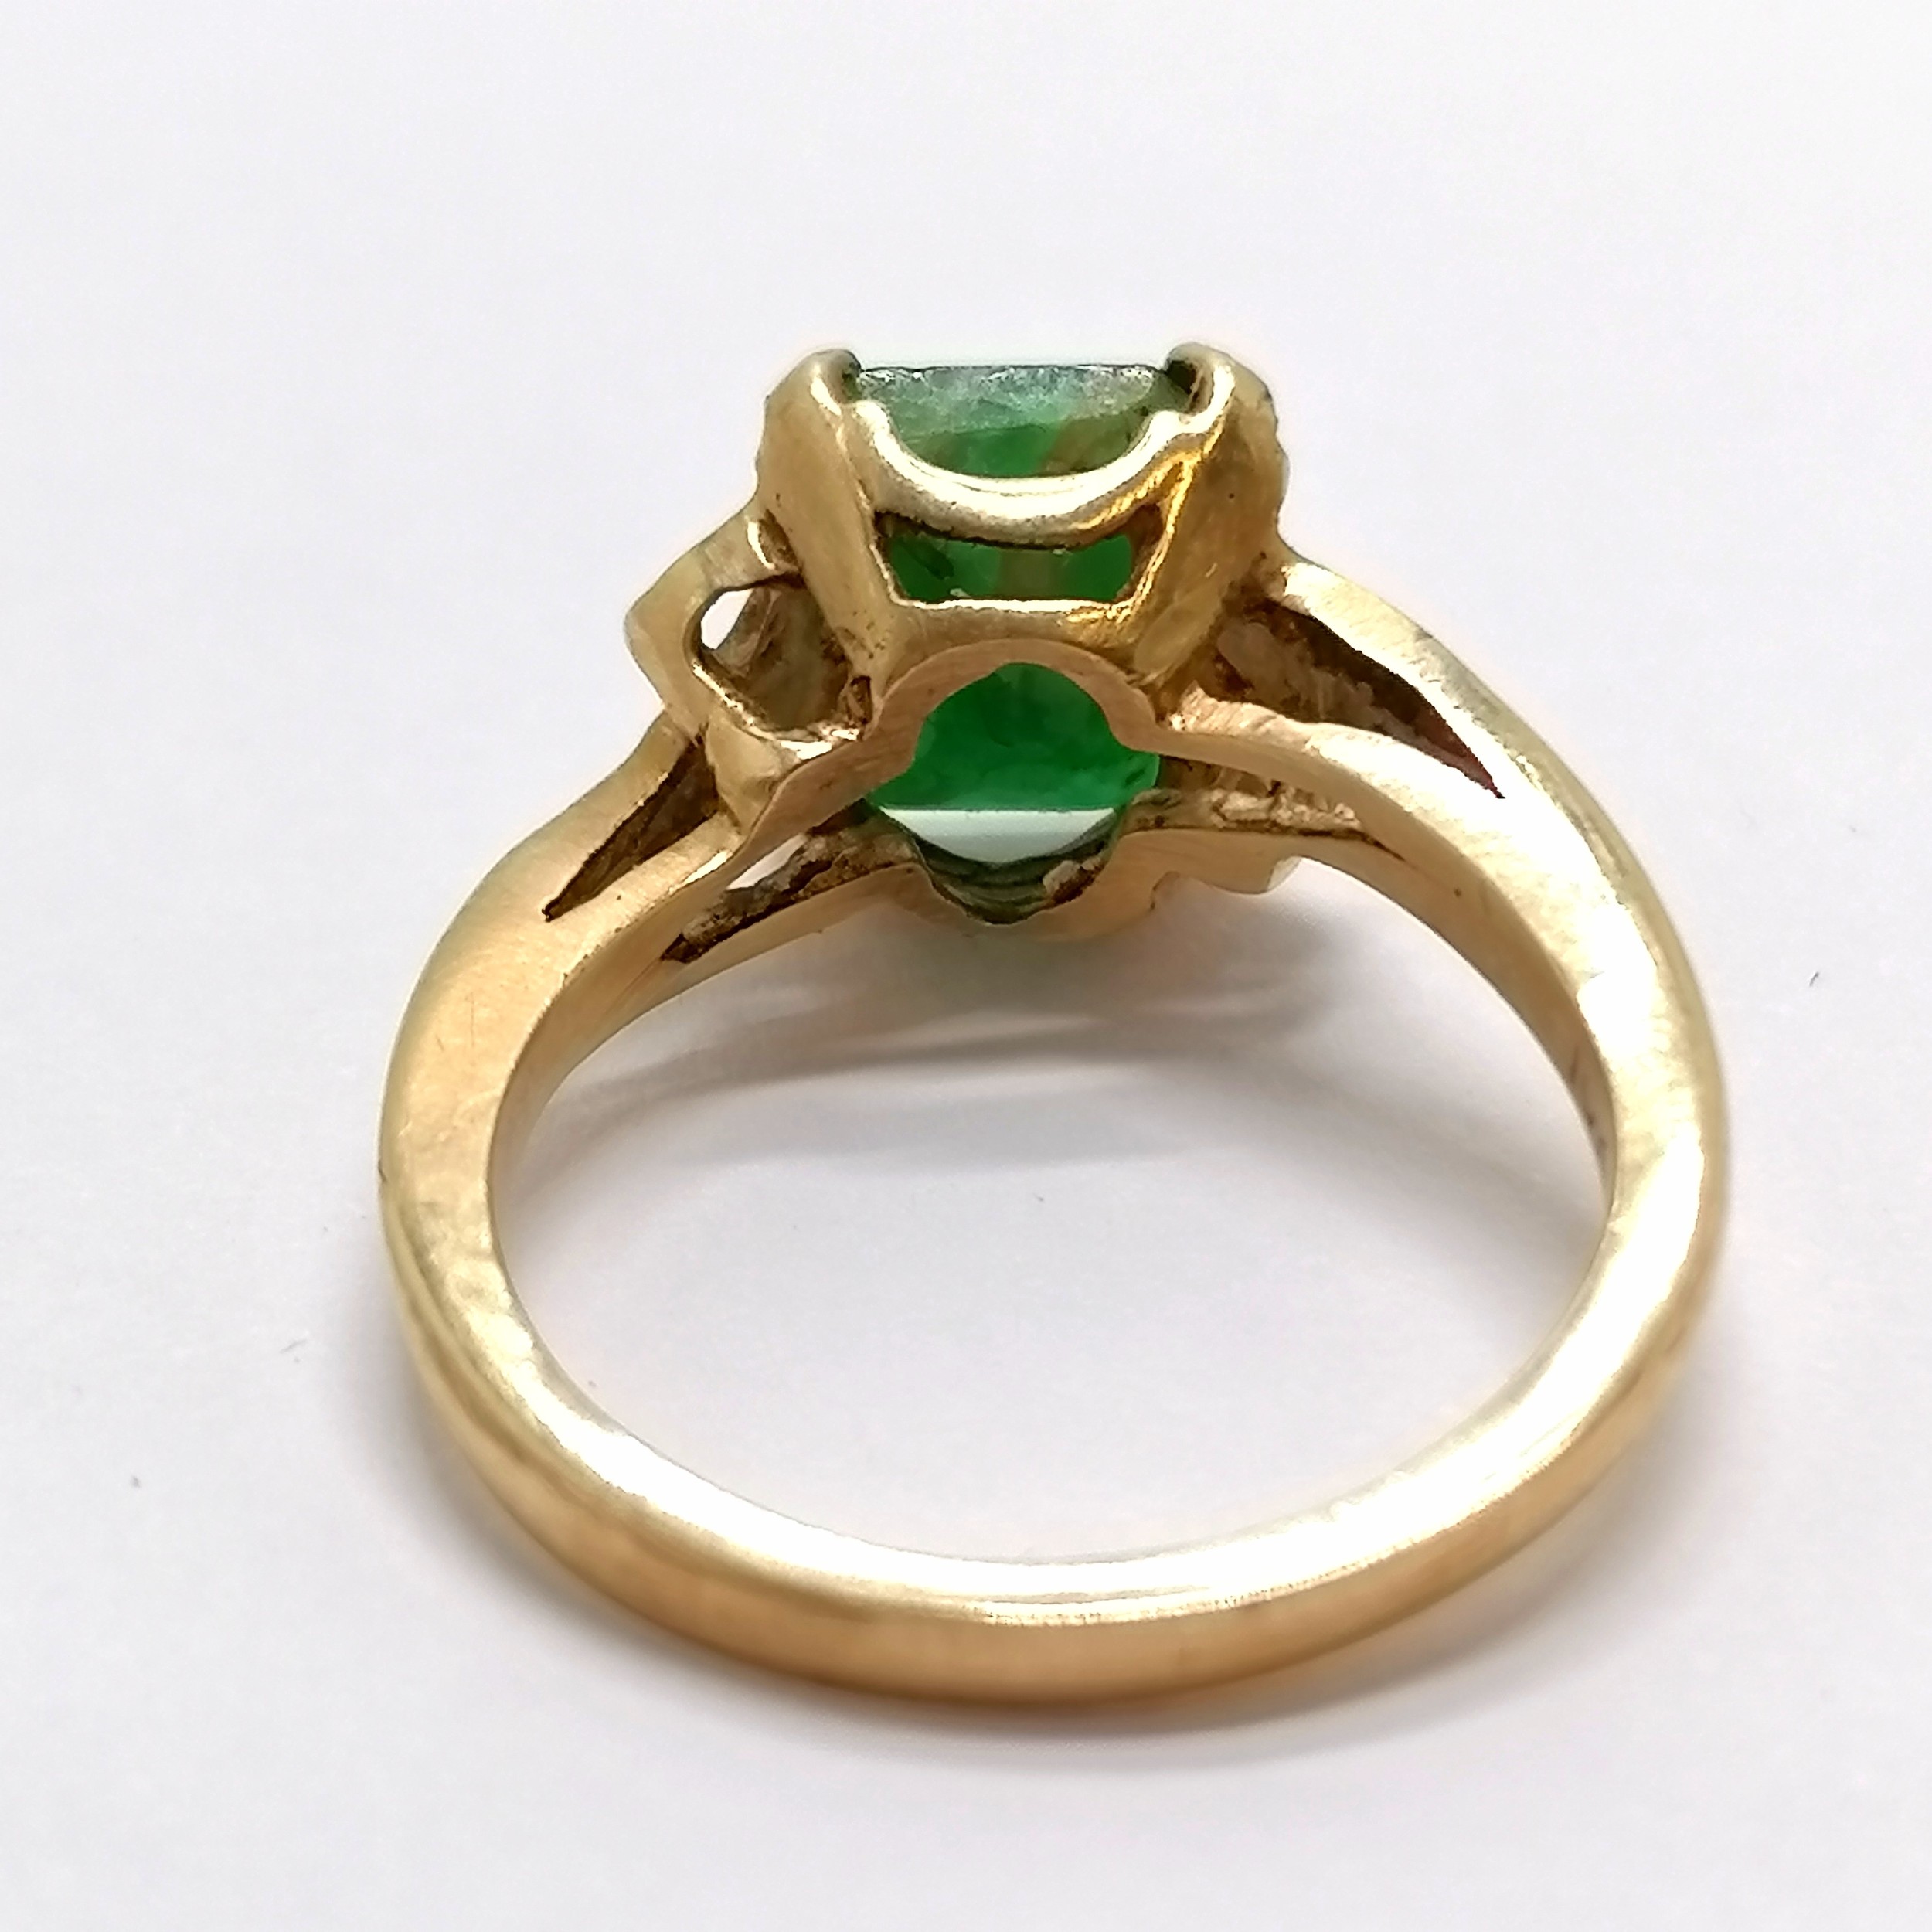 10ct marked gold emerald (?) set ring with fancy shoulders - size G½ & 2.5g total weight - SOLD ON - Image 3 of 4